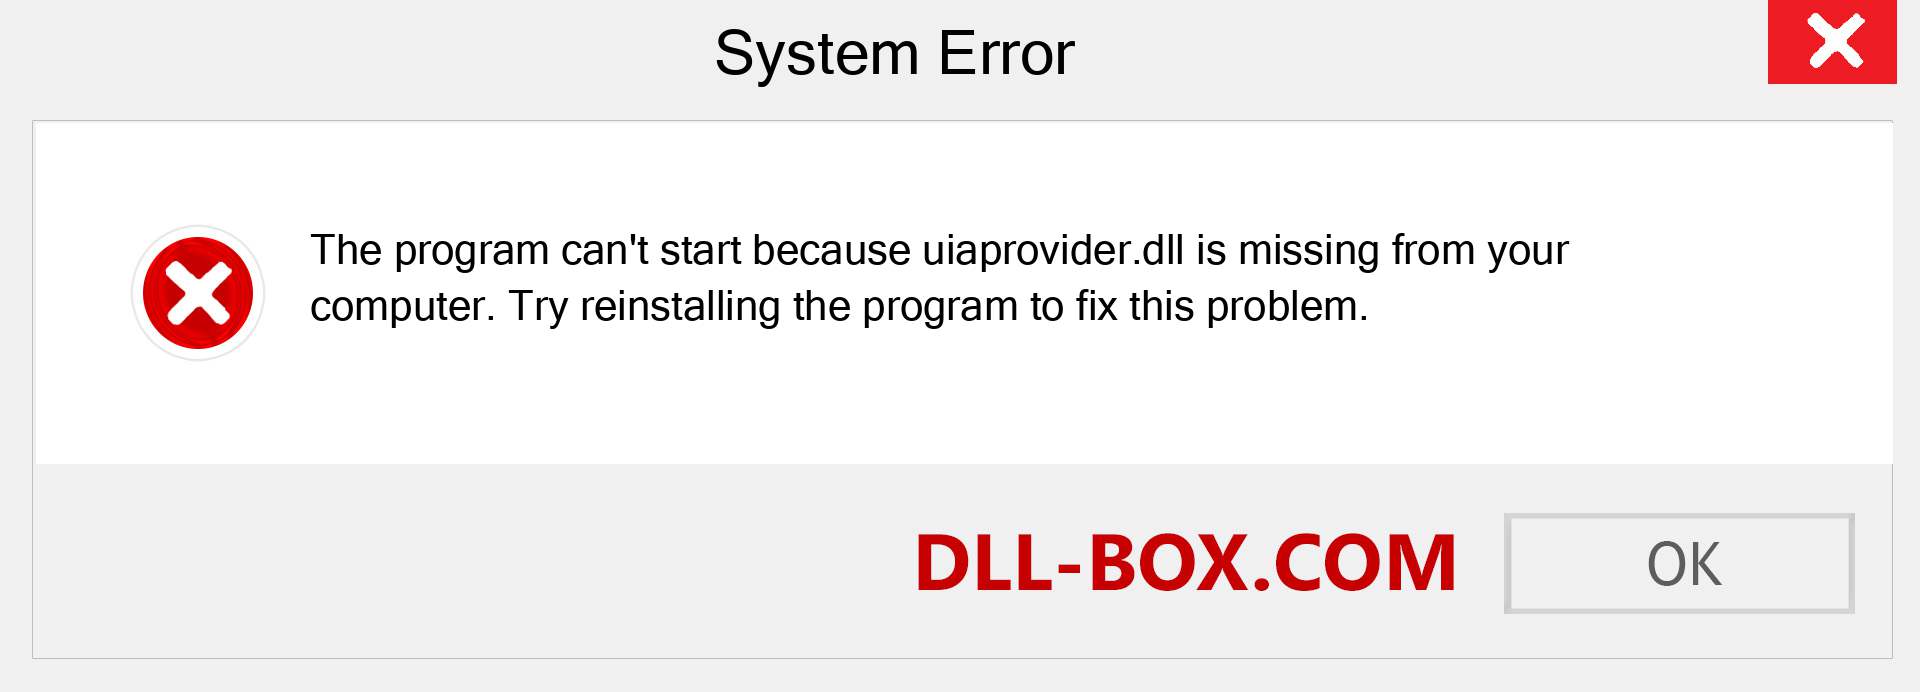  uiaprovider.dll file is missing?. Download for Windows 7, 8, 10 - Fix  uiaprovider dll Missing Error on Windows, photos, images